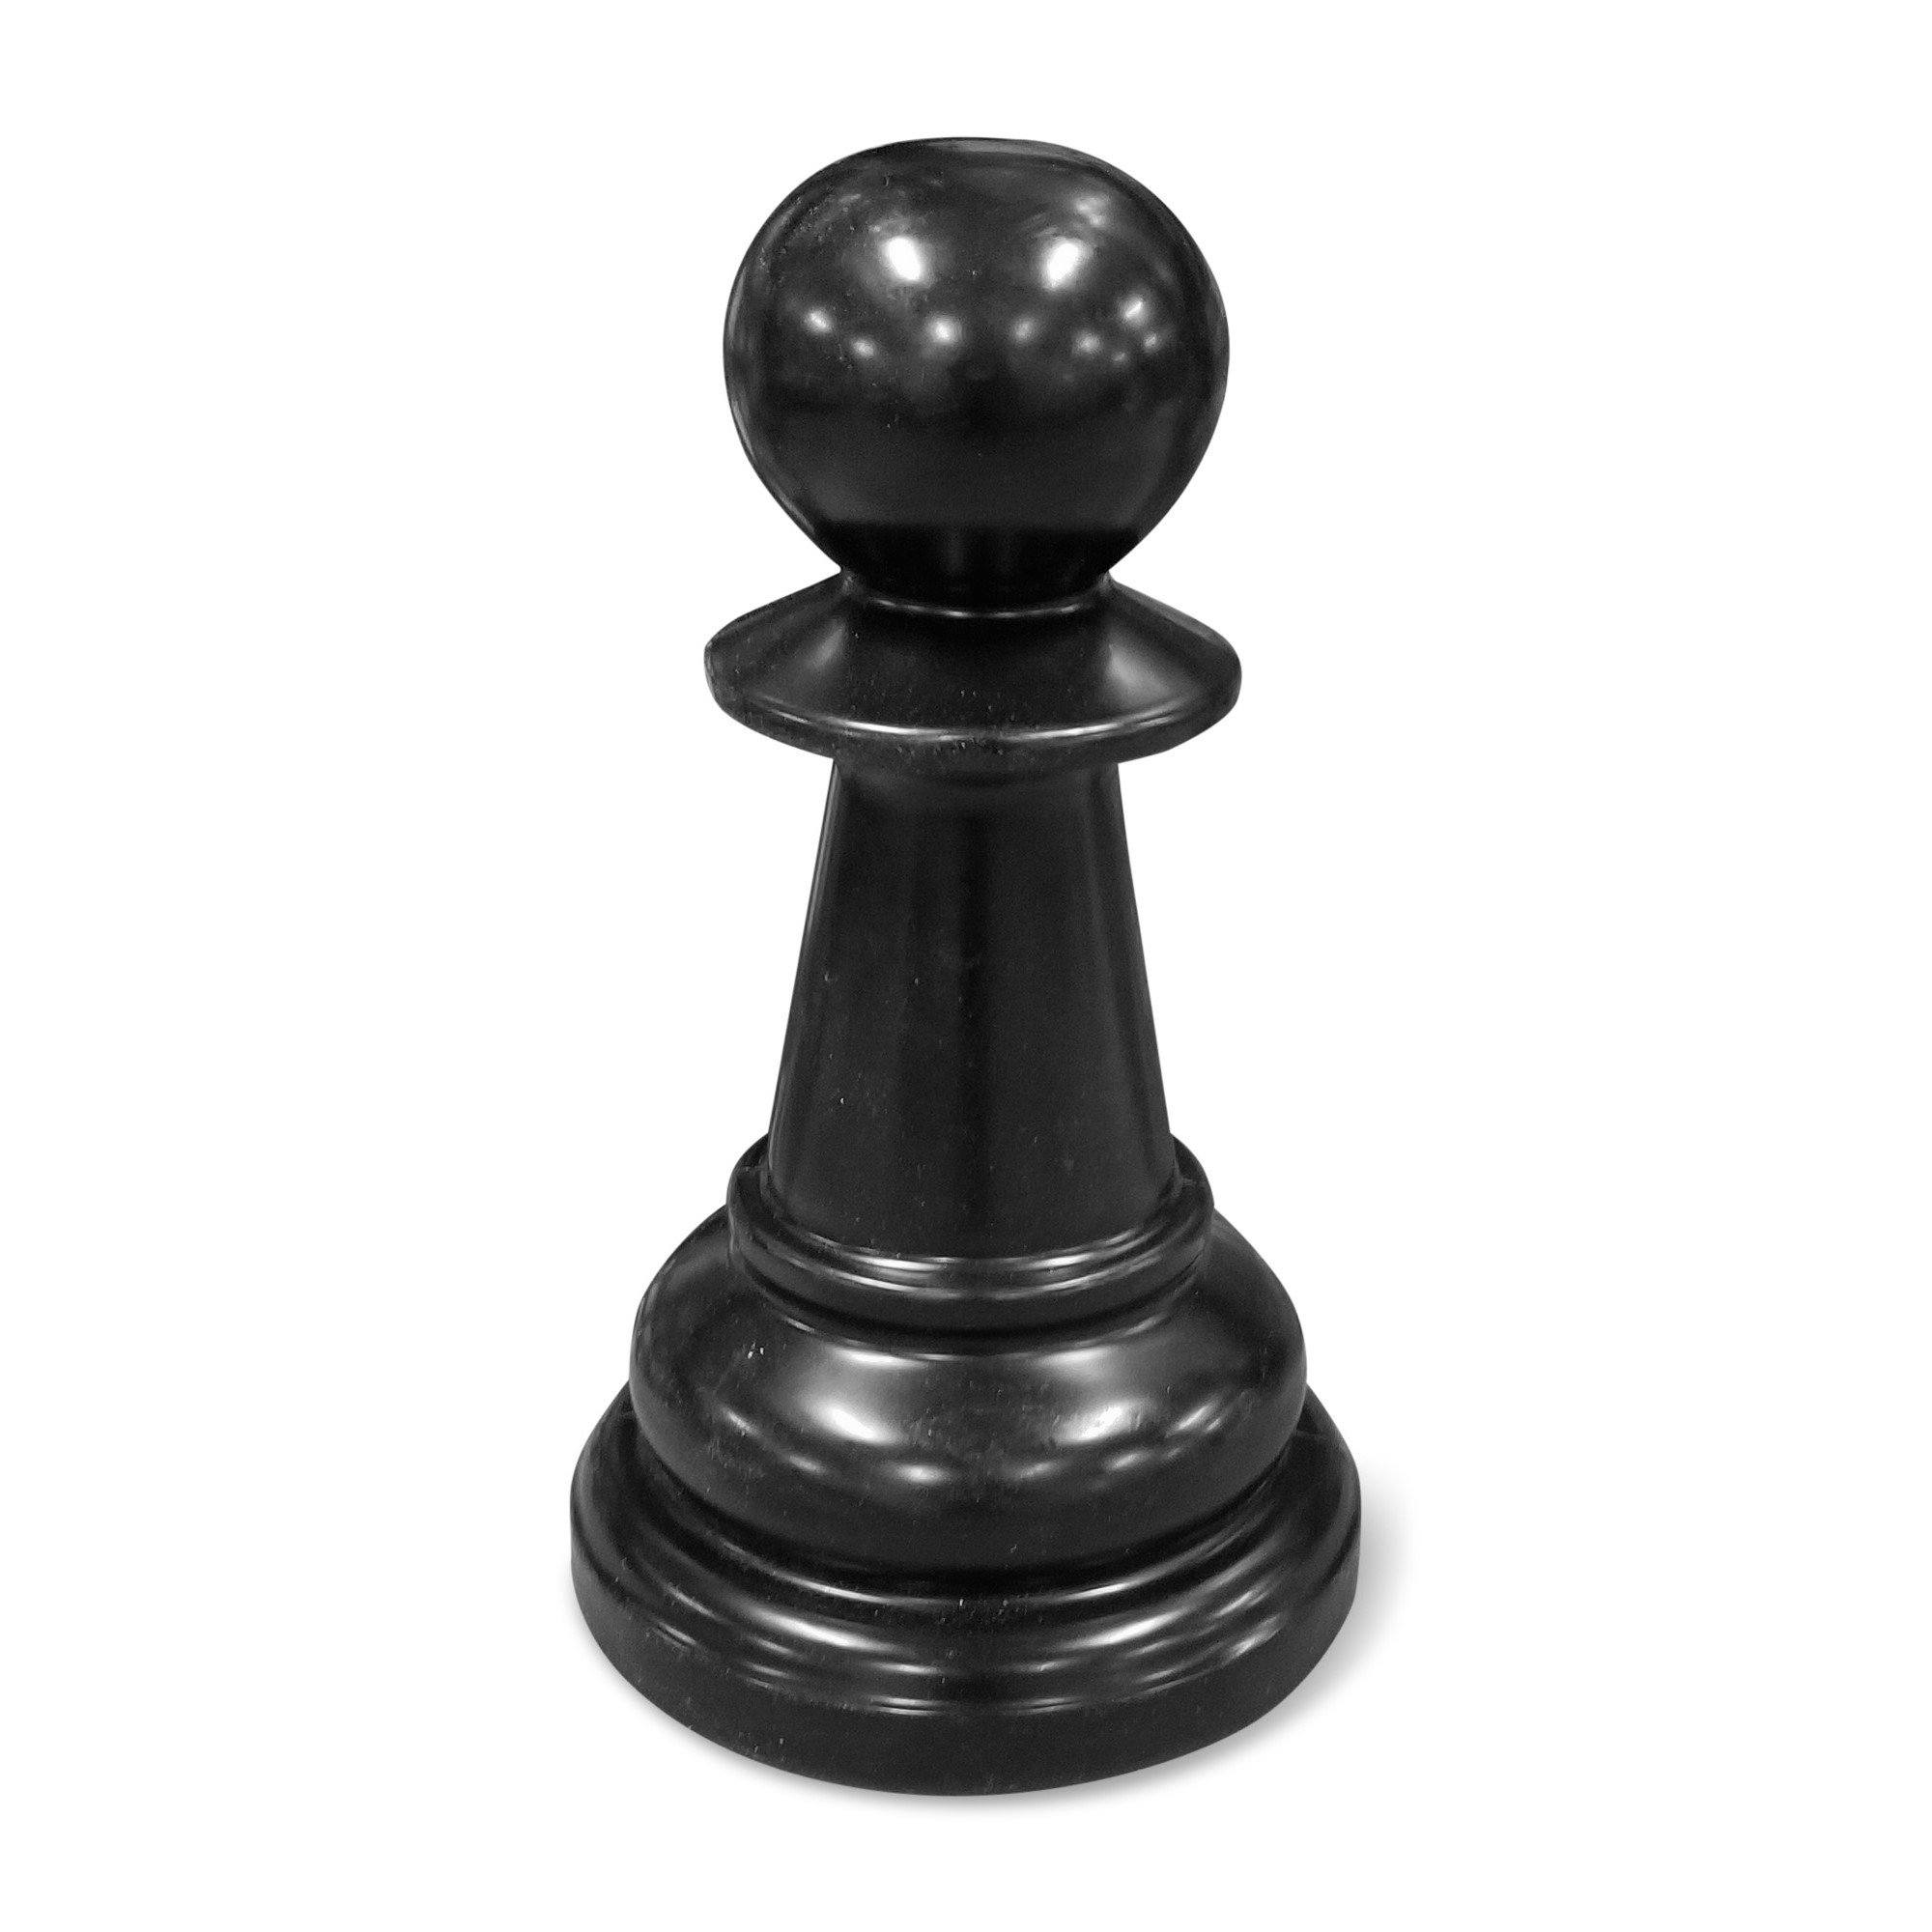 Chess Pieces - Pawn